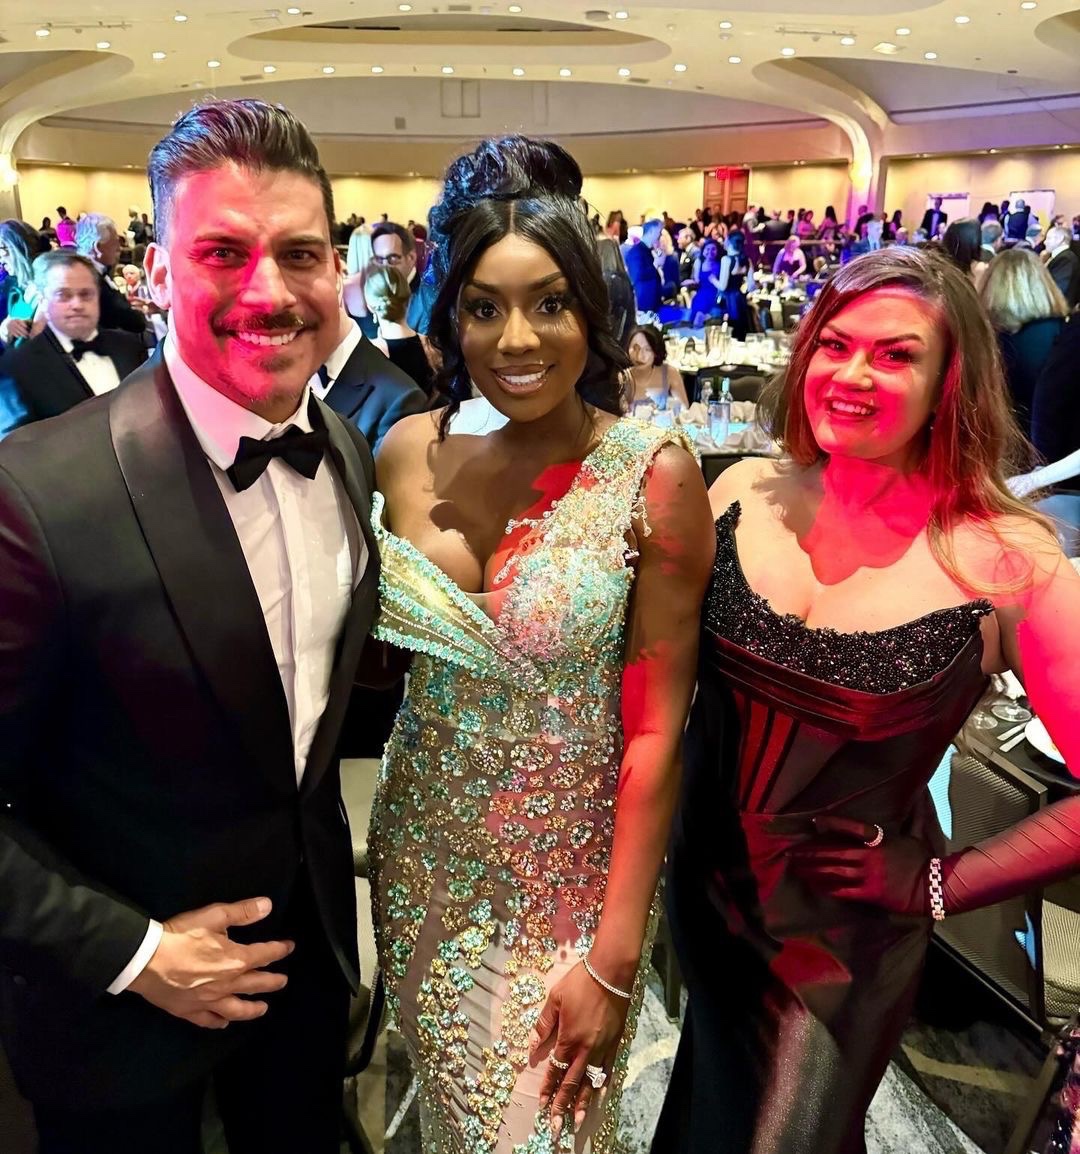 Jax Taylor, Wendy Osefo, and Brittany Cartwright at the White House Correspondents’ Dinner.